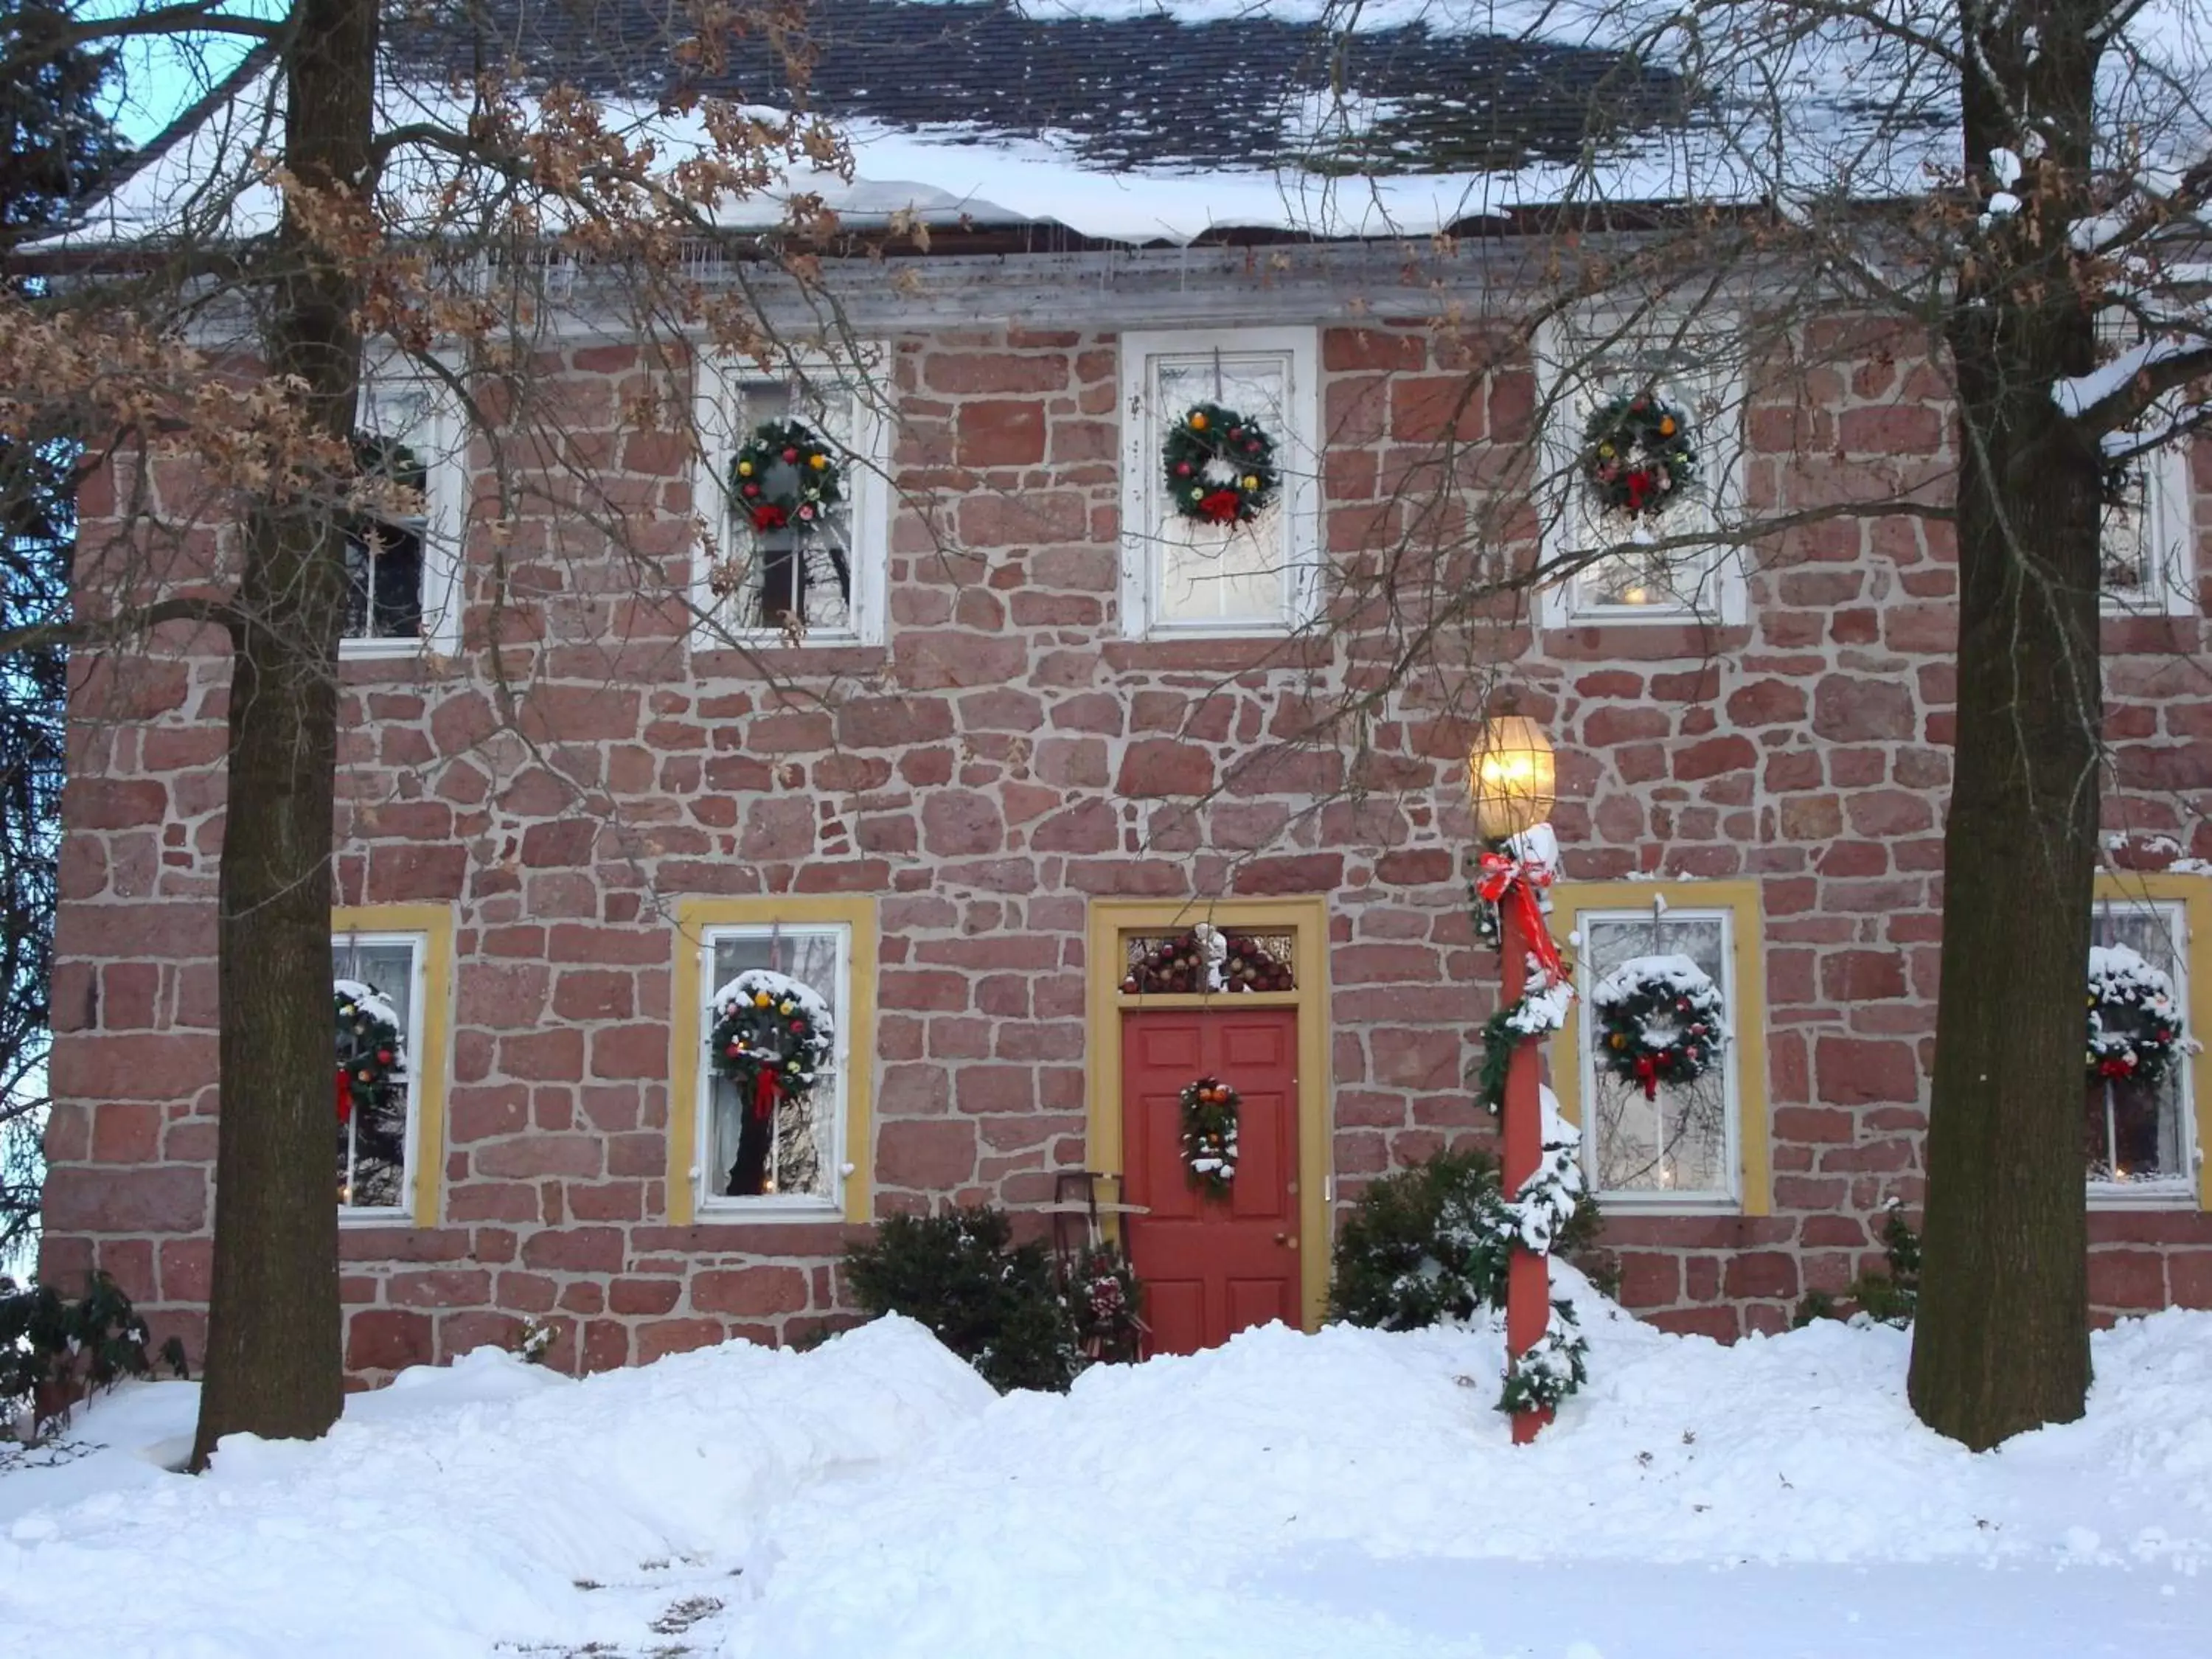 Property building, Winter in Brownstone Colonial Inn